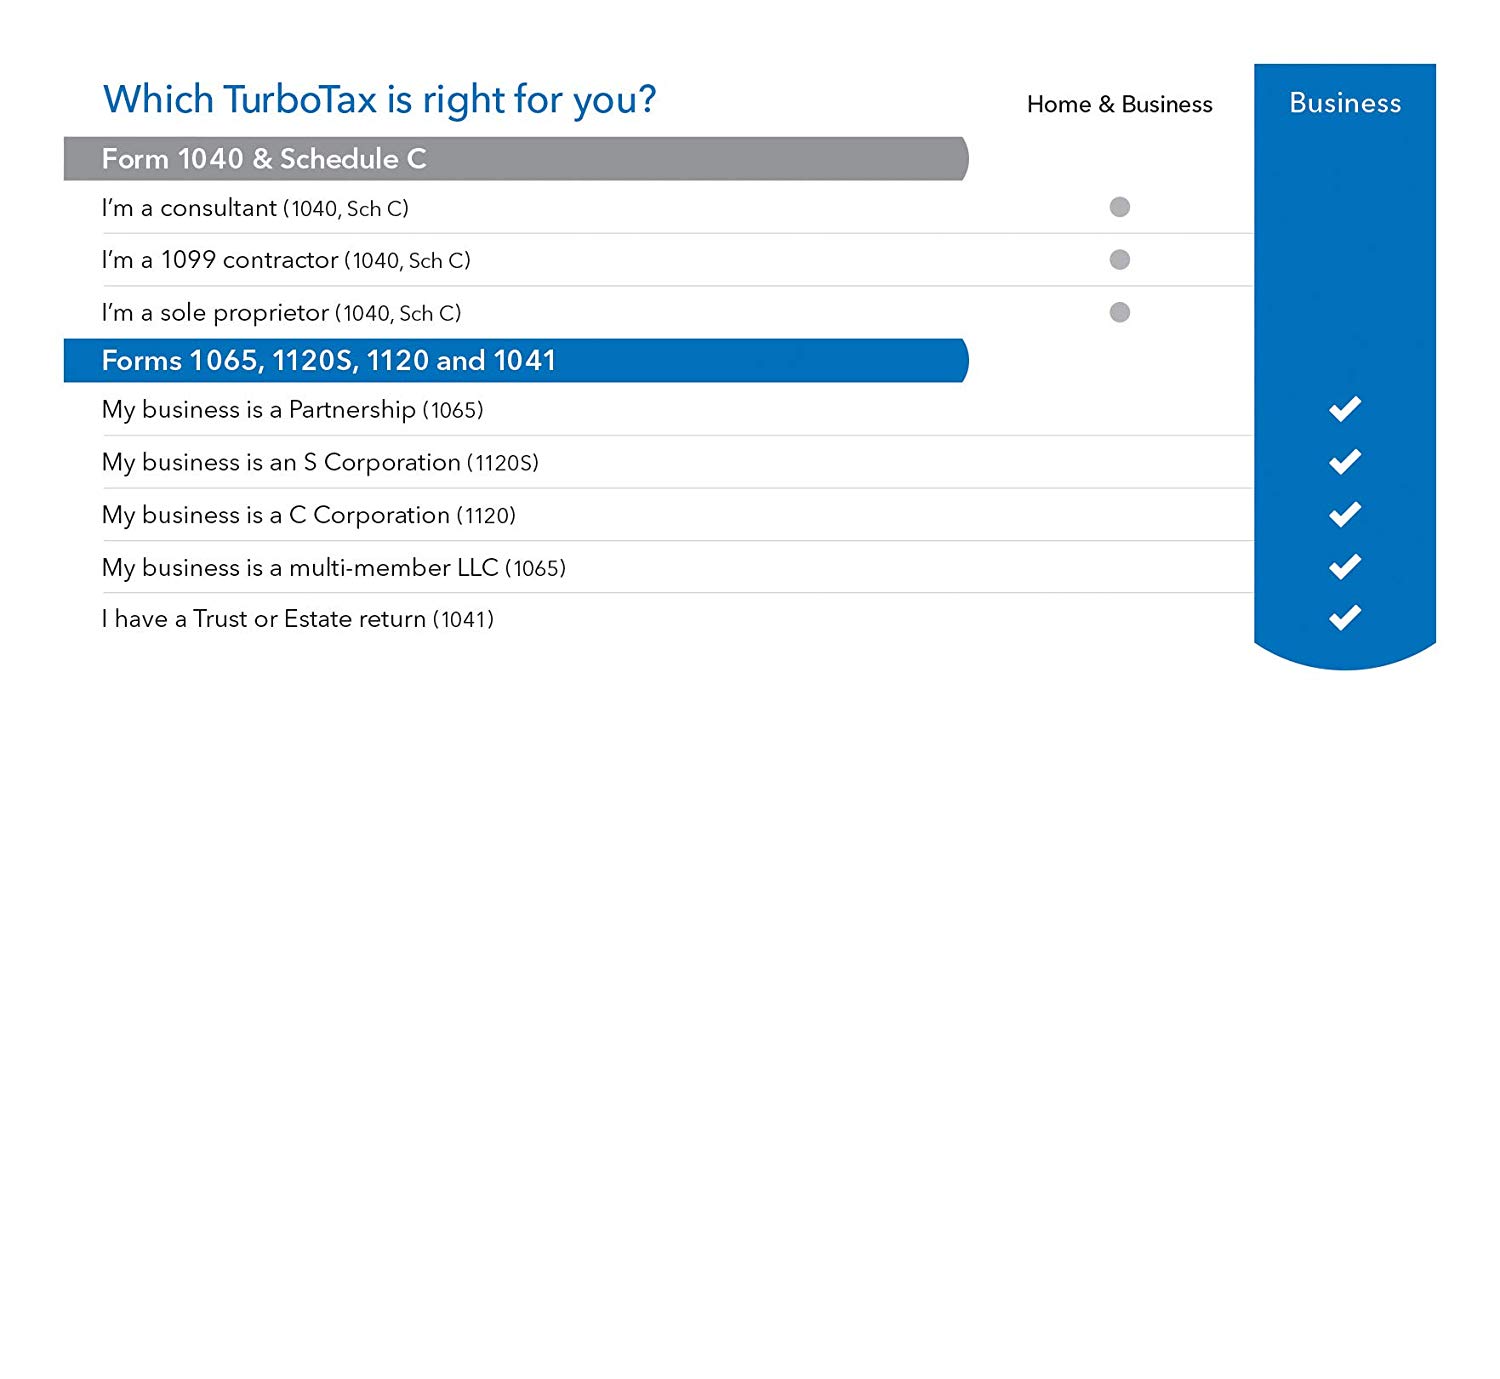 turbotax 2016 home and business for mac